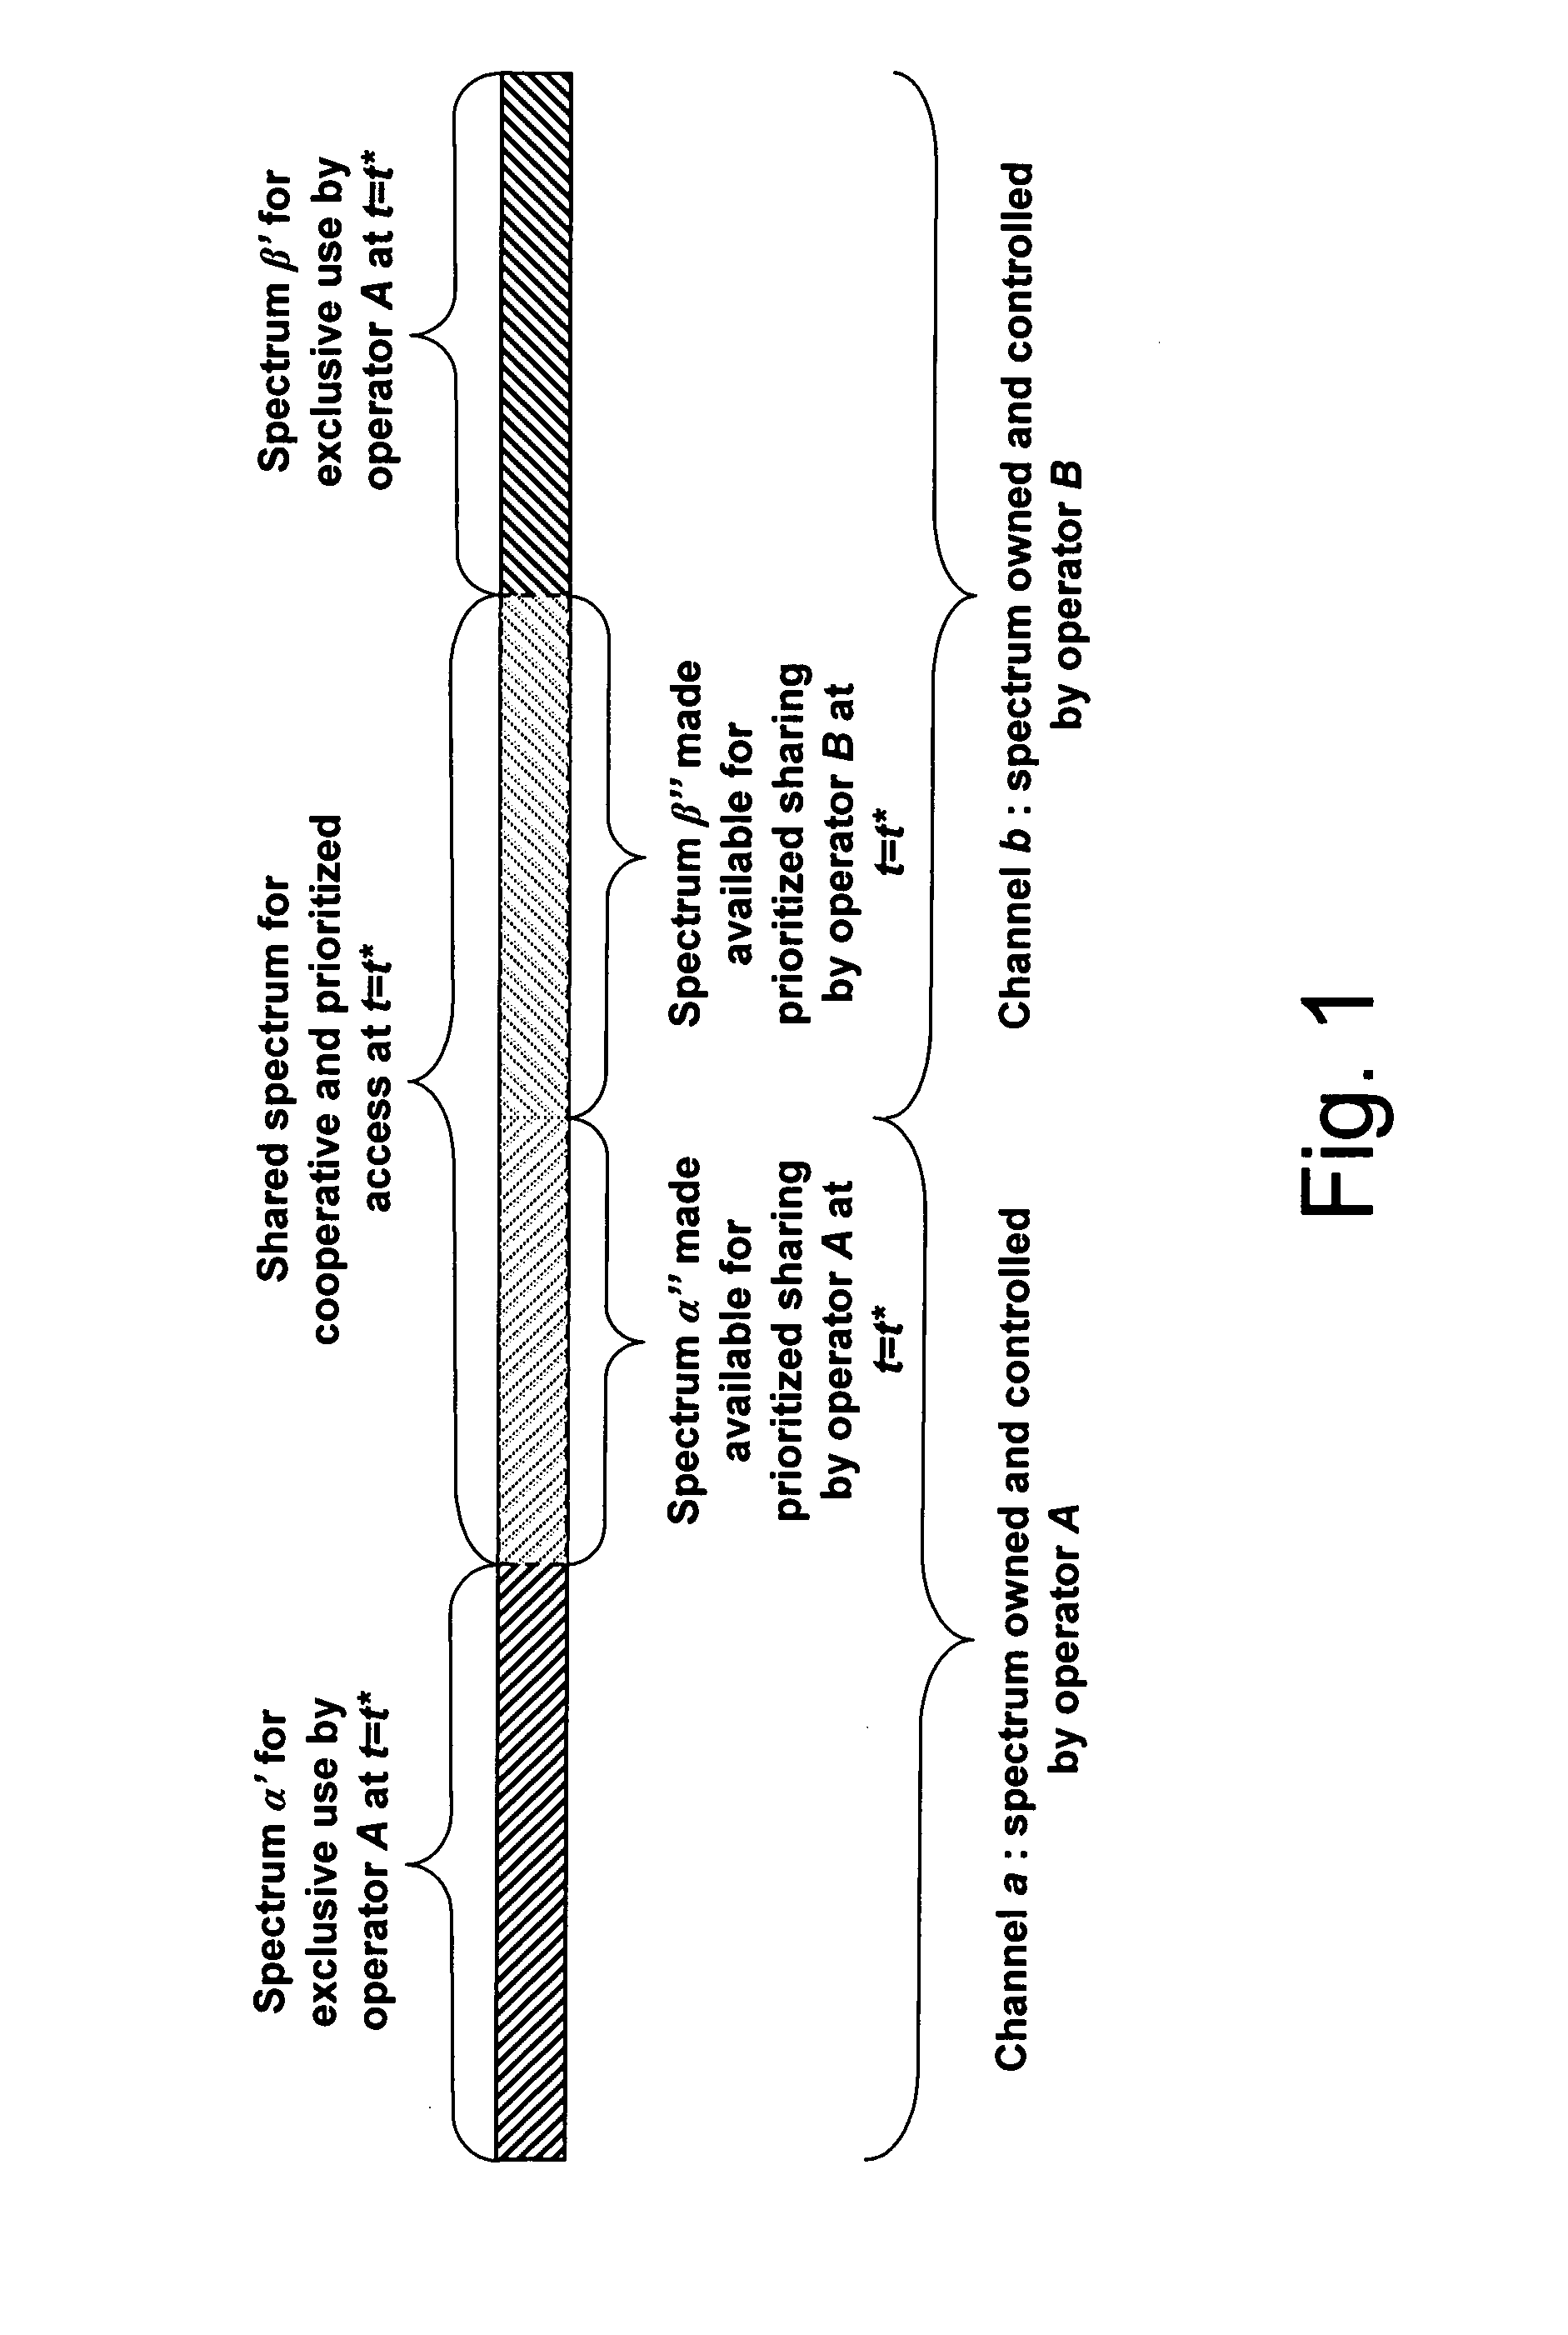 Inter-operator spectrum sharing control, inter-operator interference coordination method, and radio resource scheduling in wireless communication systems